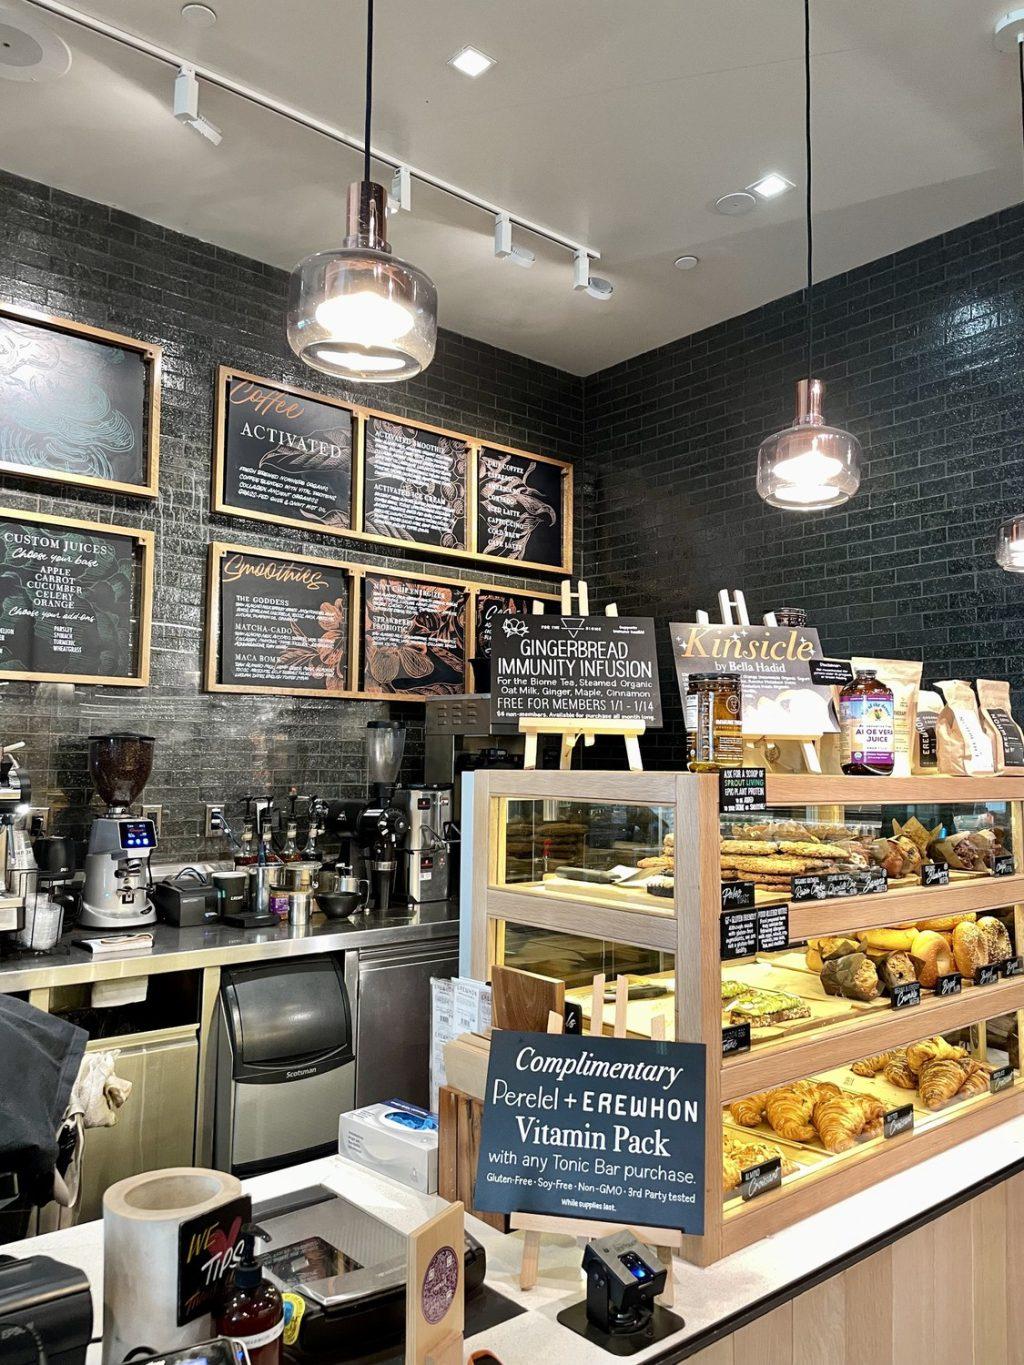 The Erewhon Tonic Bar features customized smoothies and juices, smoothie bowls, coffee and freshly baked pastries.  With Erewhon membership, customers could get discounts on tonic bar purchases and other exclusive offers.